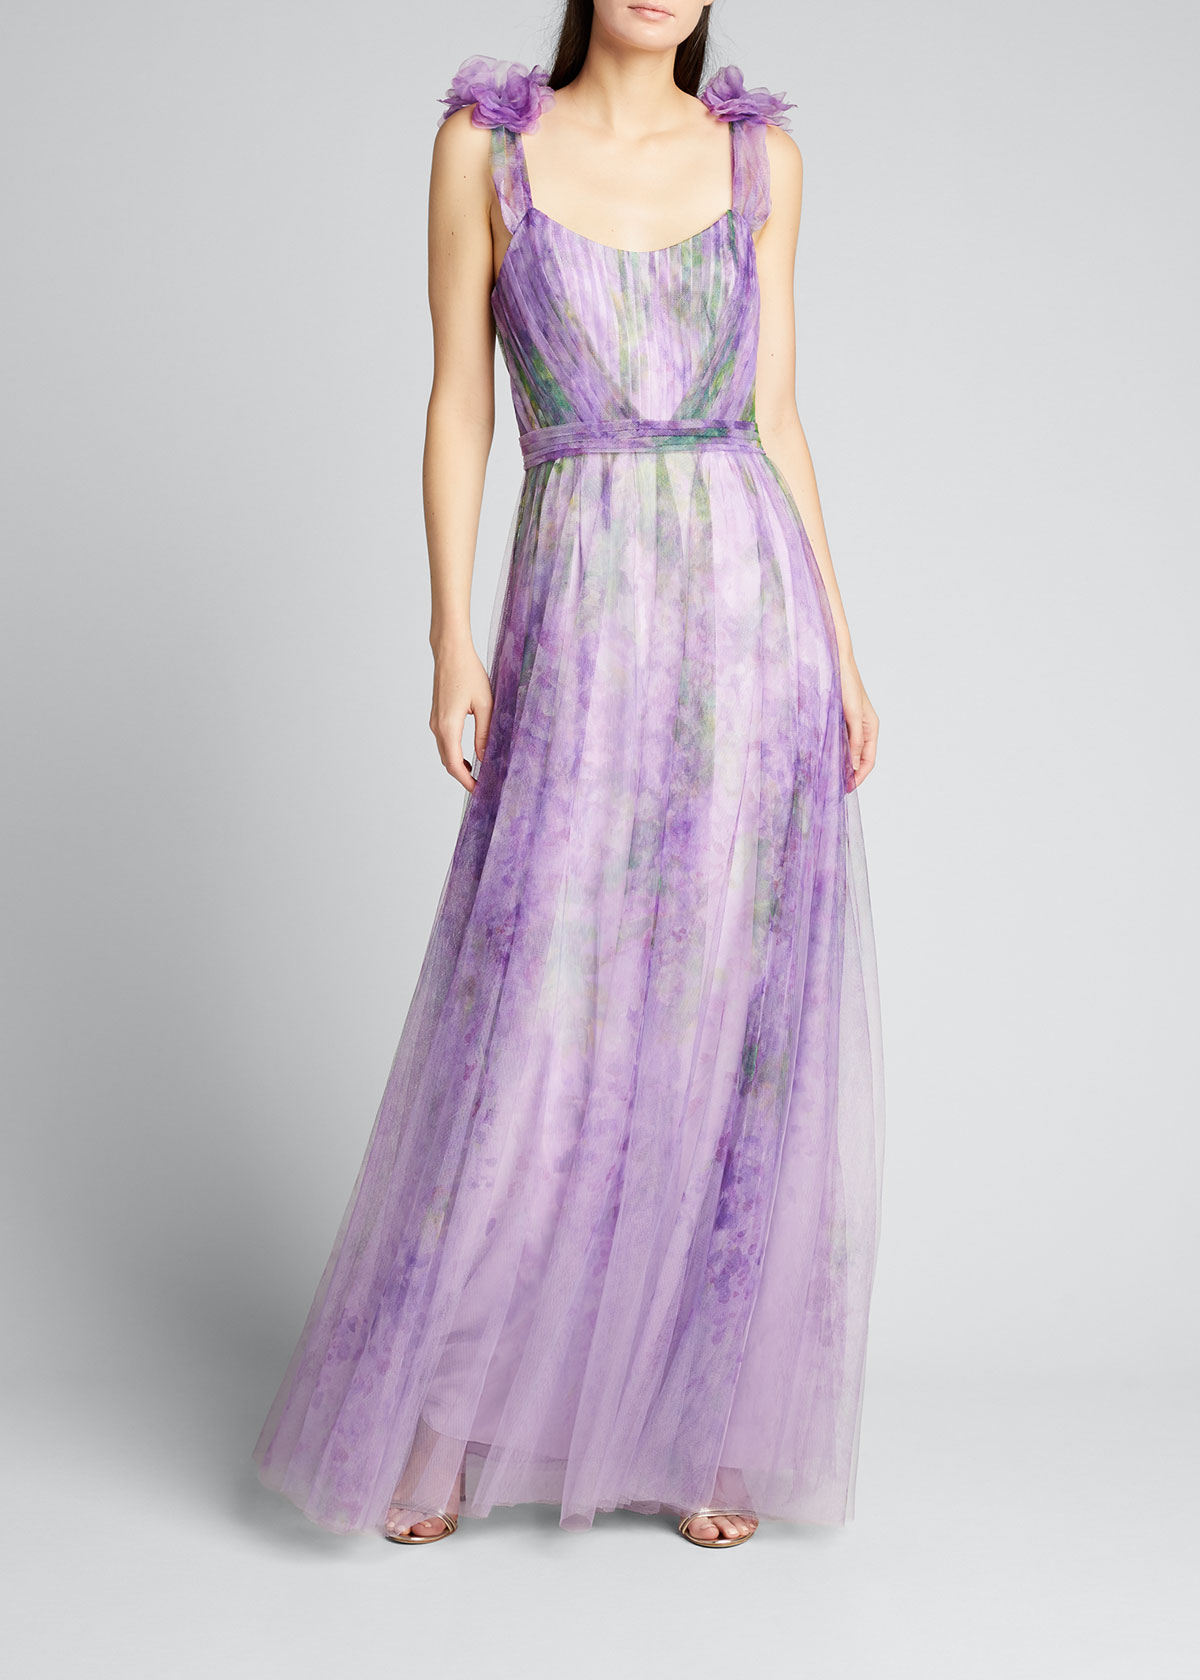 Watercolor Printed Tulle Gown with Draped Bodice – ZARZAR FASHION